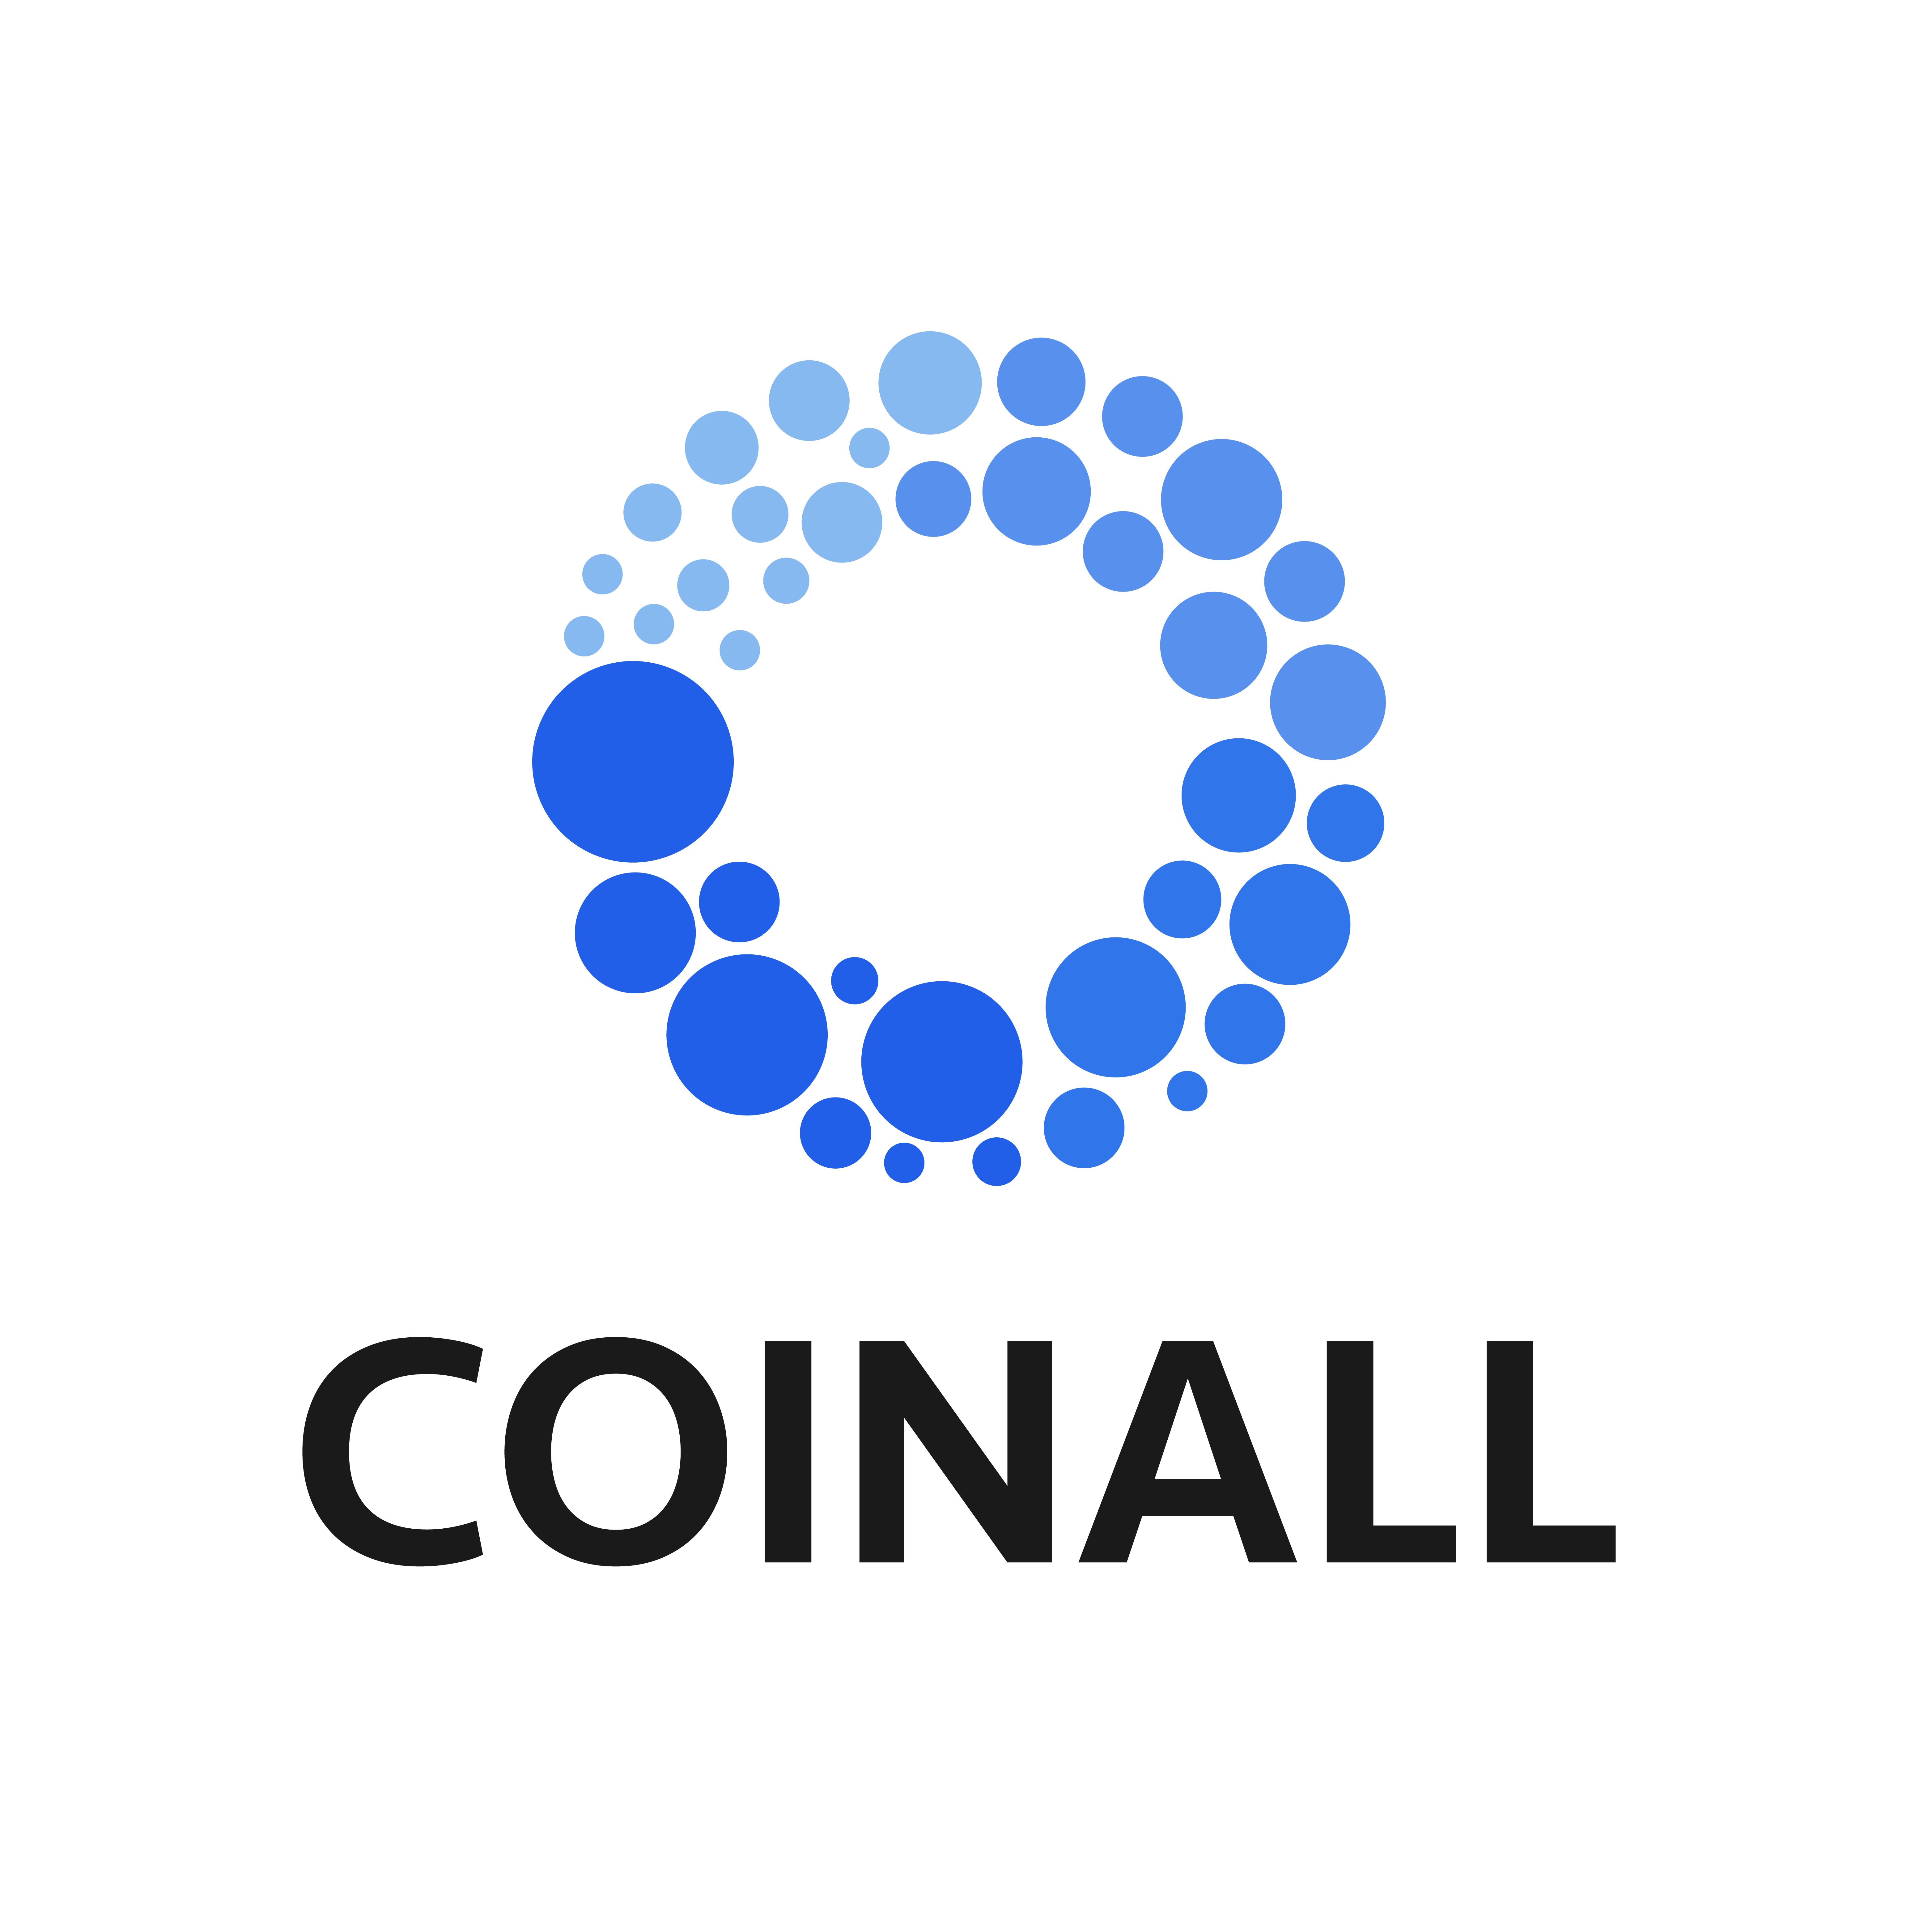 VSYS Soared 70% after Being Listed on CoinAll, a 164530 VSYS Giveaway Is Offered